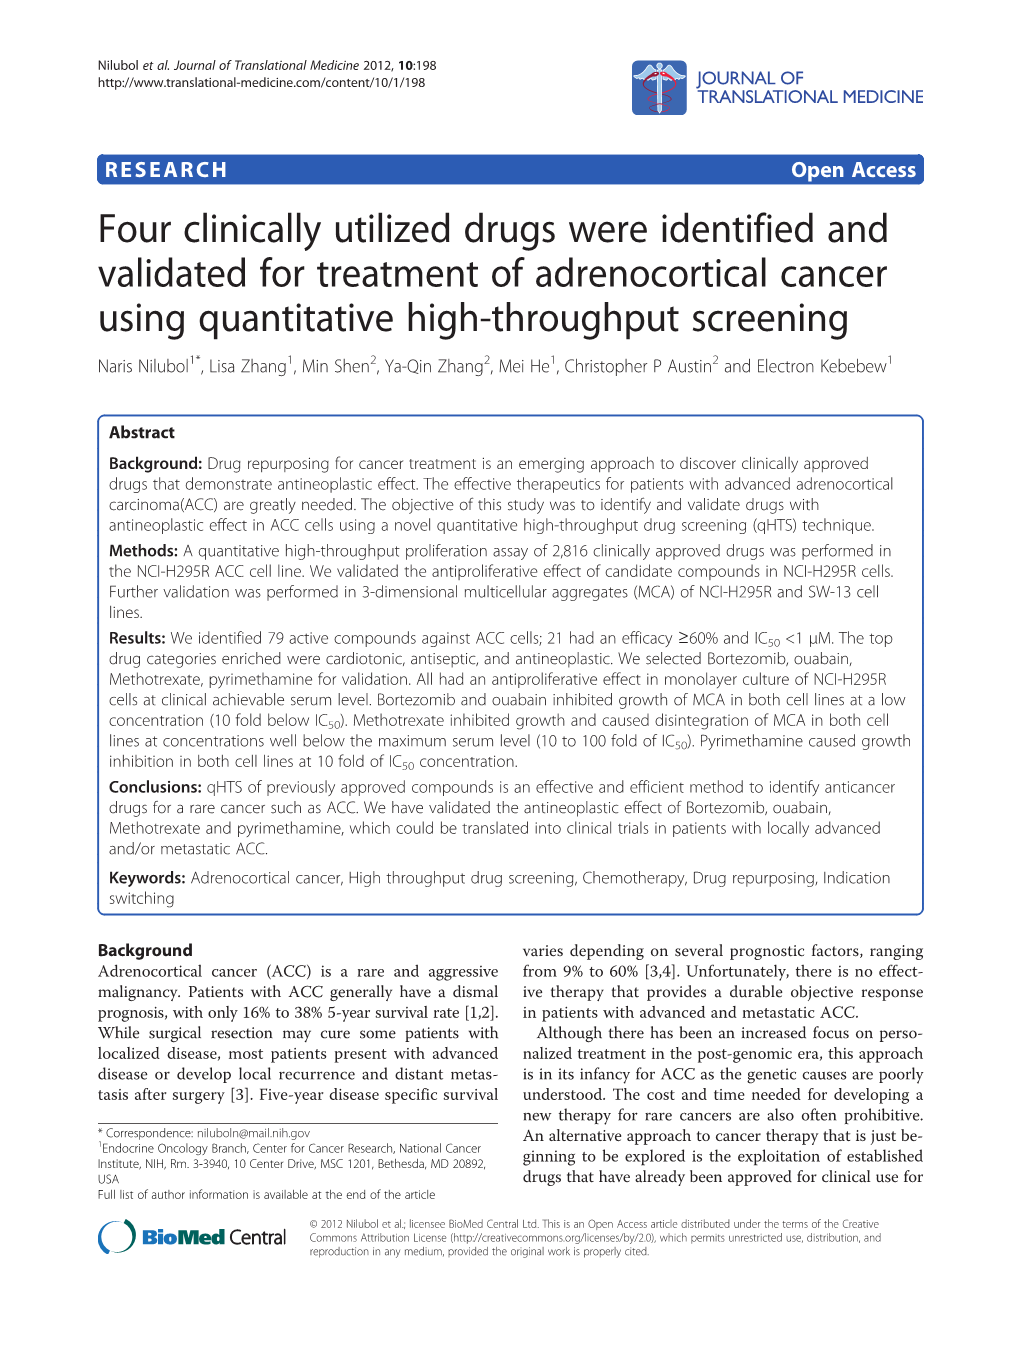 Four Clinically Utilized Drugs Were Identified and Validated For